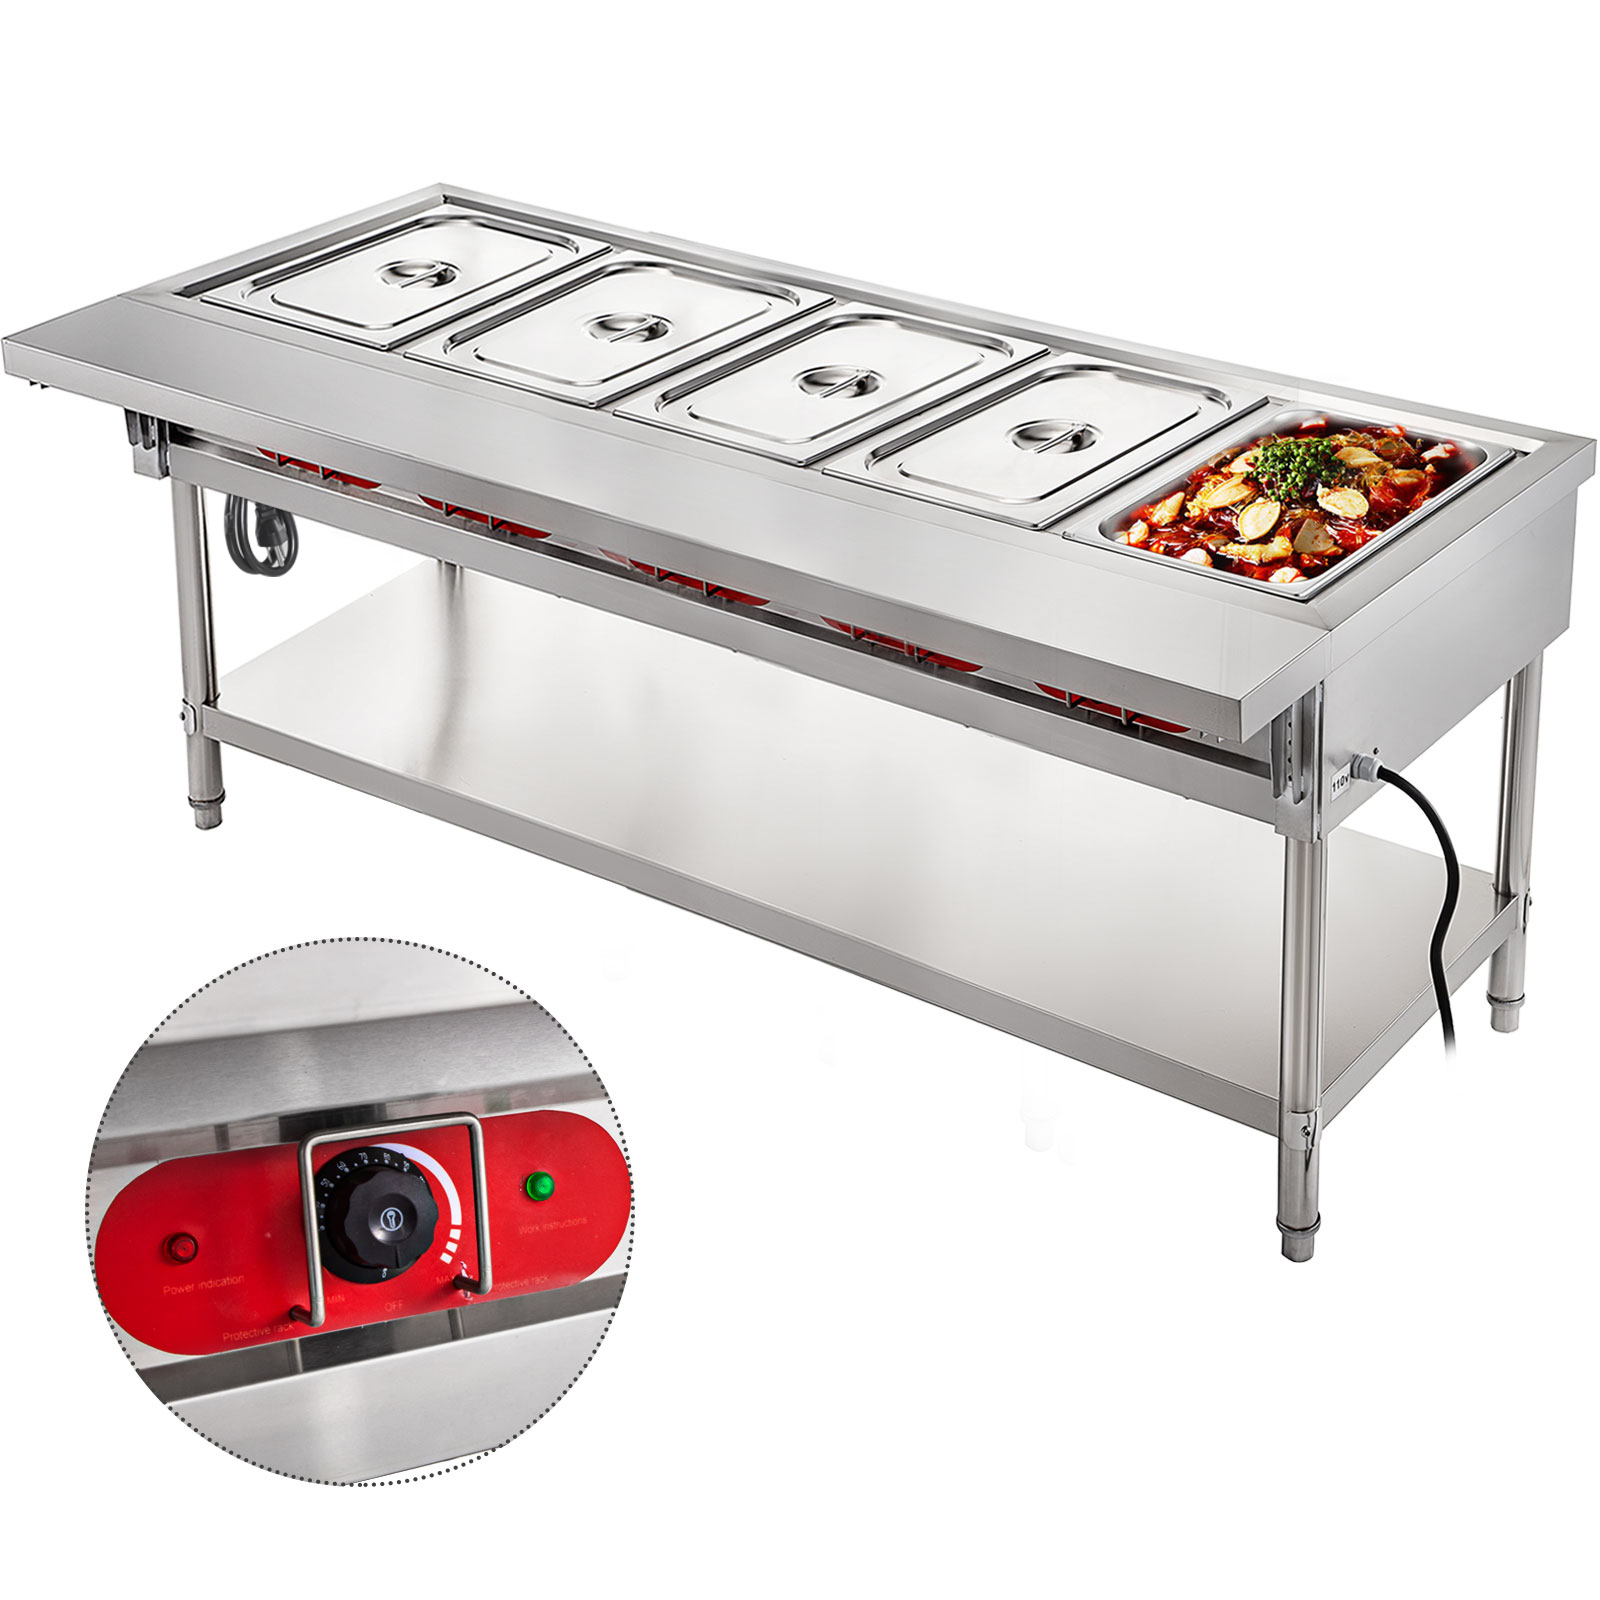 Stainless Steel Food Warmer Commercial Electric Bain Marie With 4 Pan & Lids 1/2 